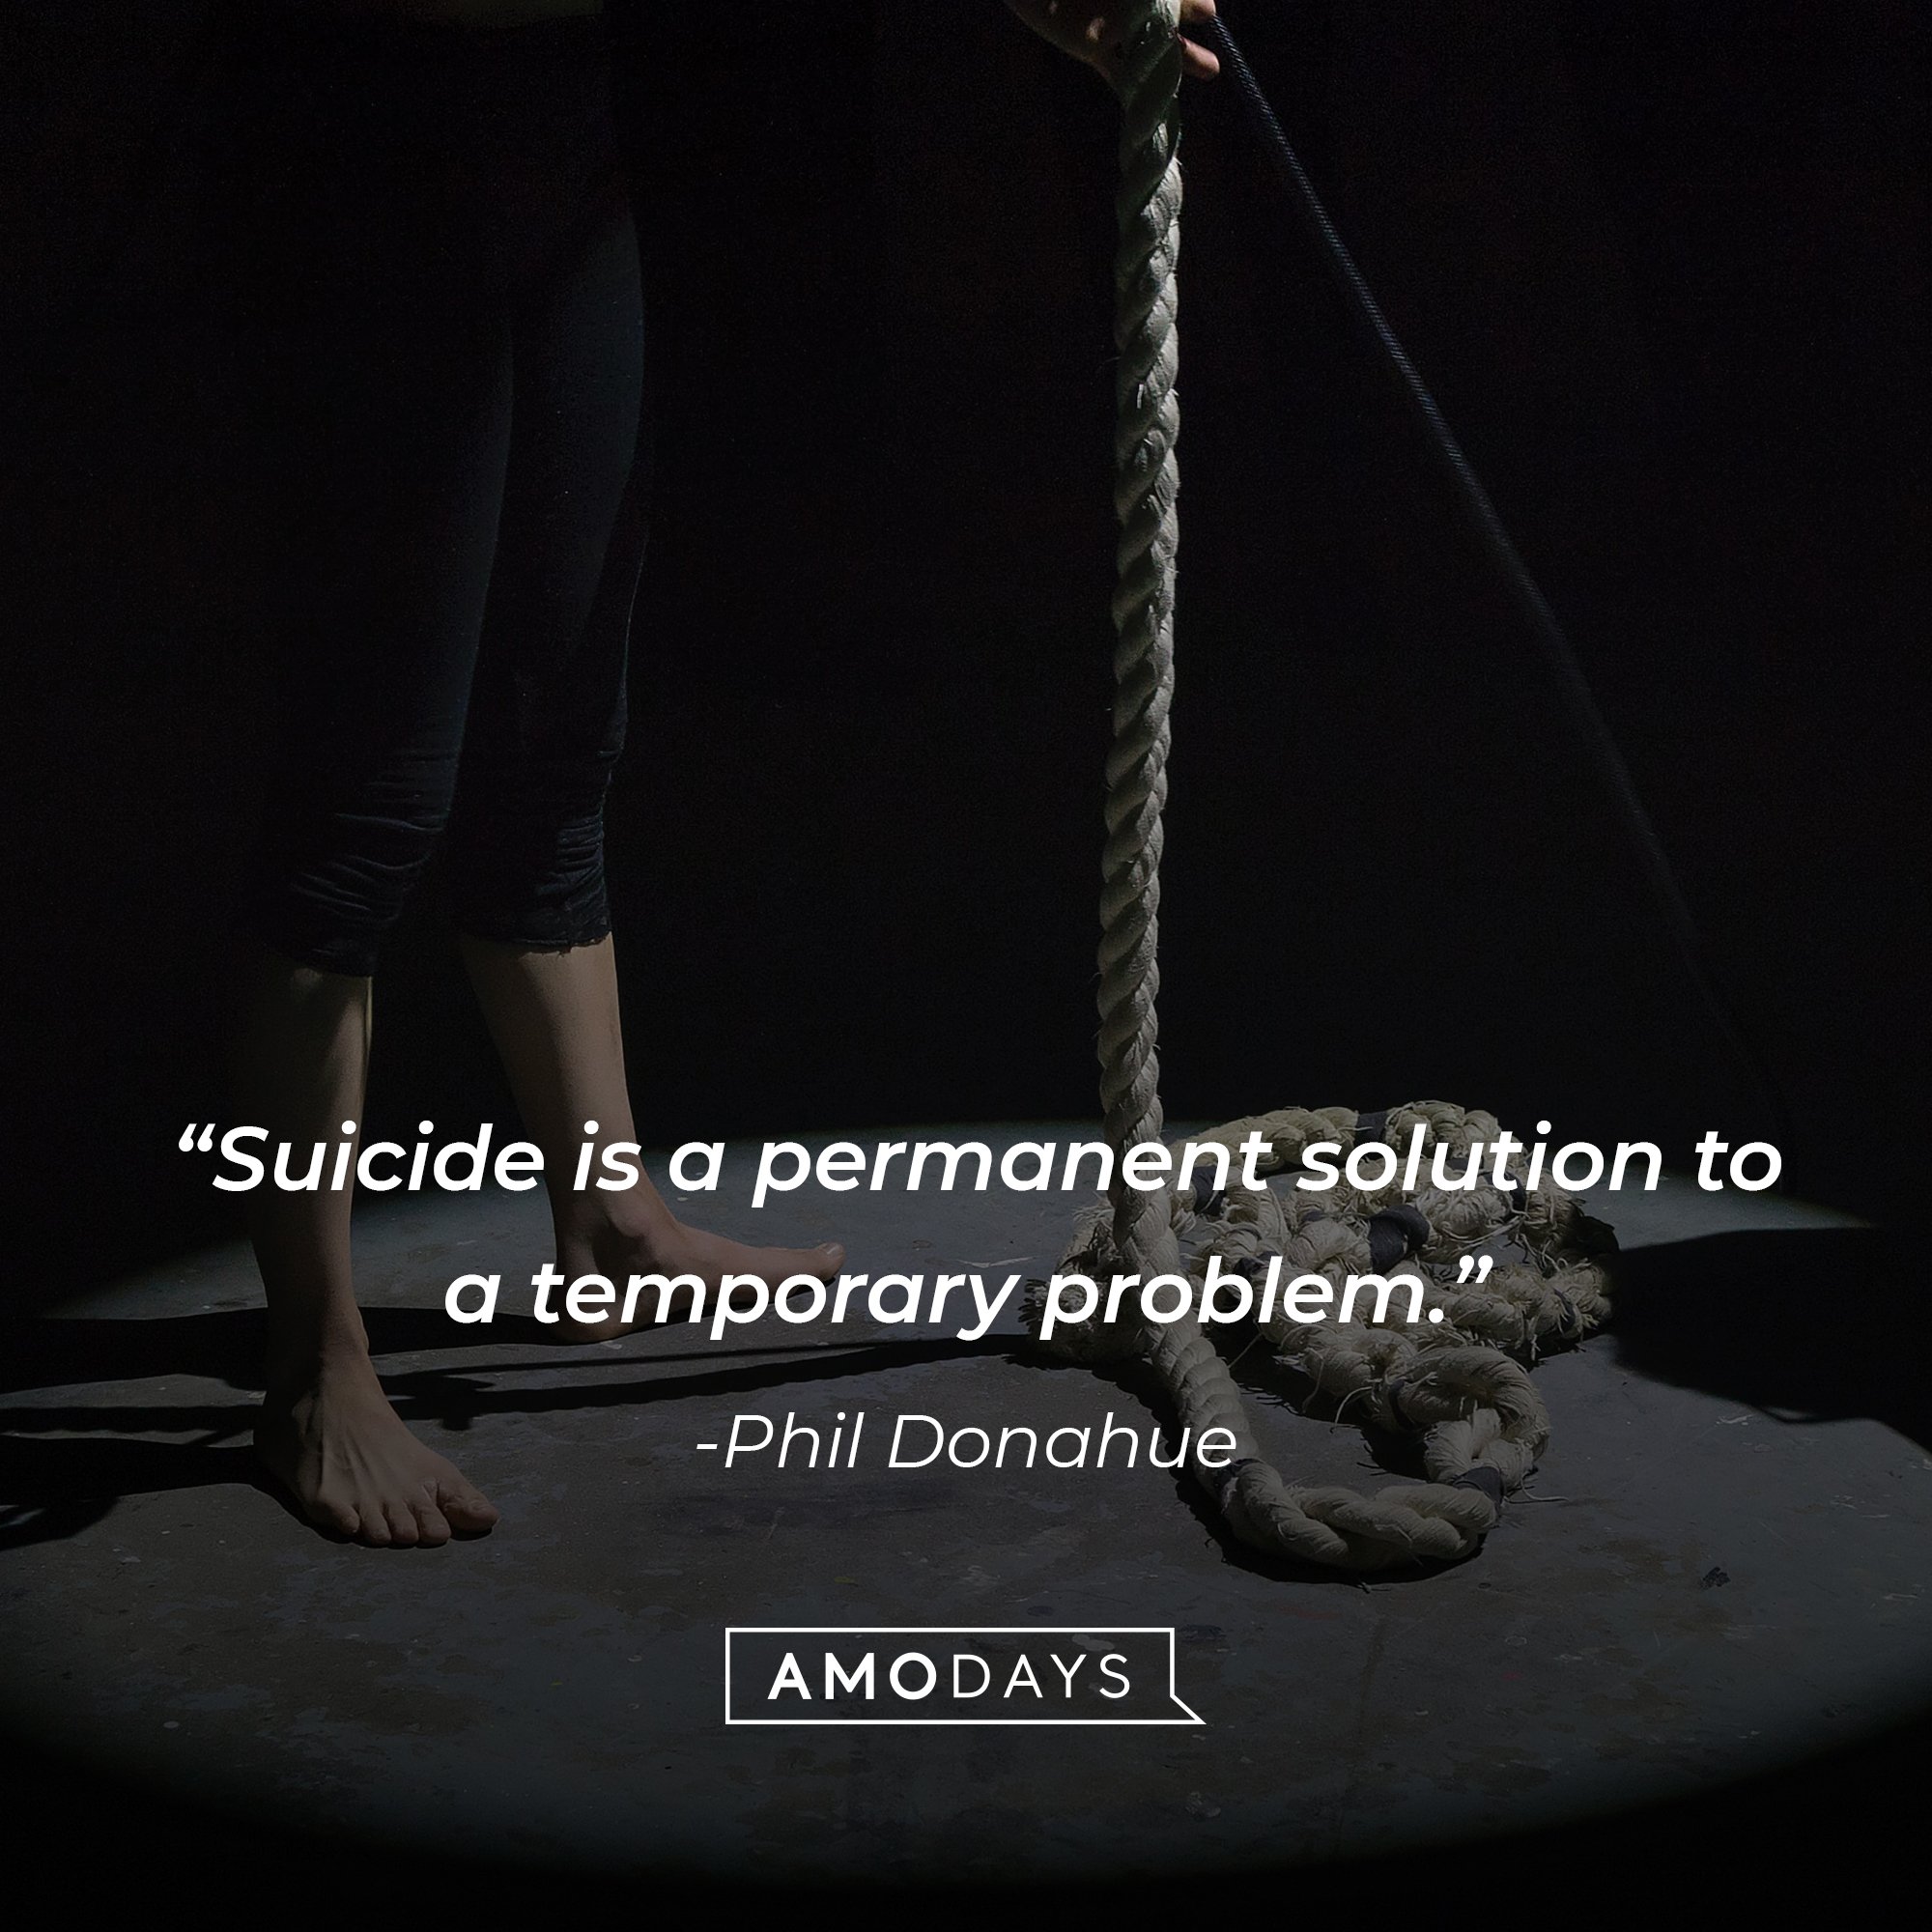 Phil Donahue's quote:  “Suicide is a permanent solution to a temporary problem.” | Image: AmoDays